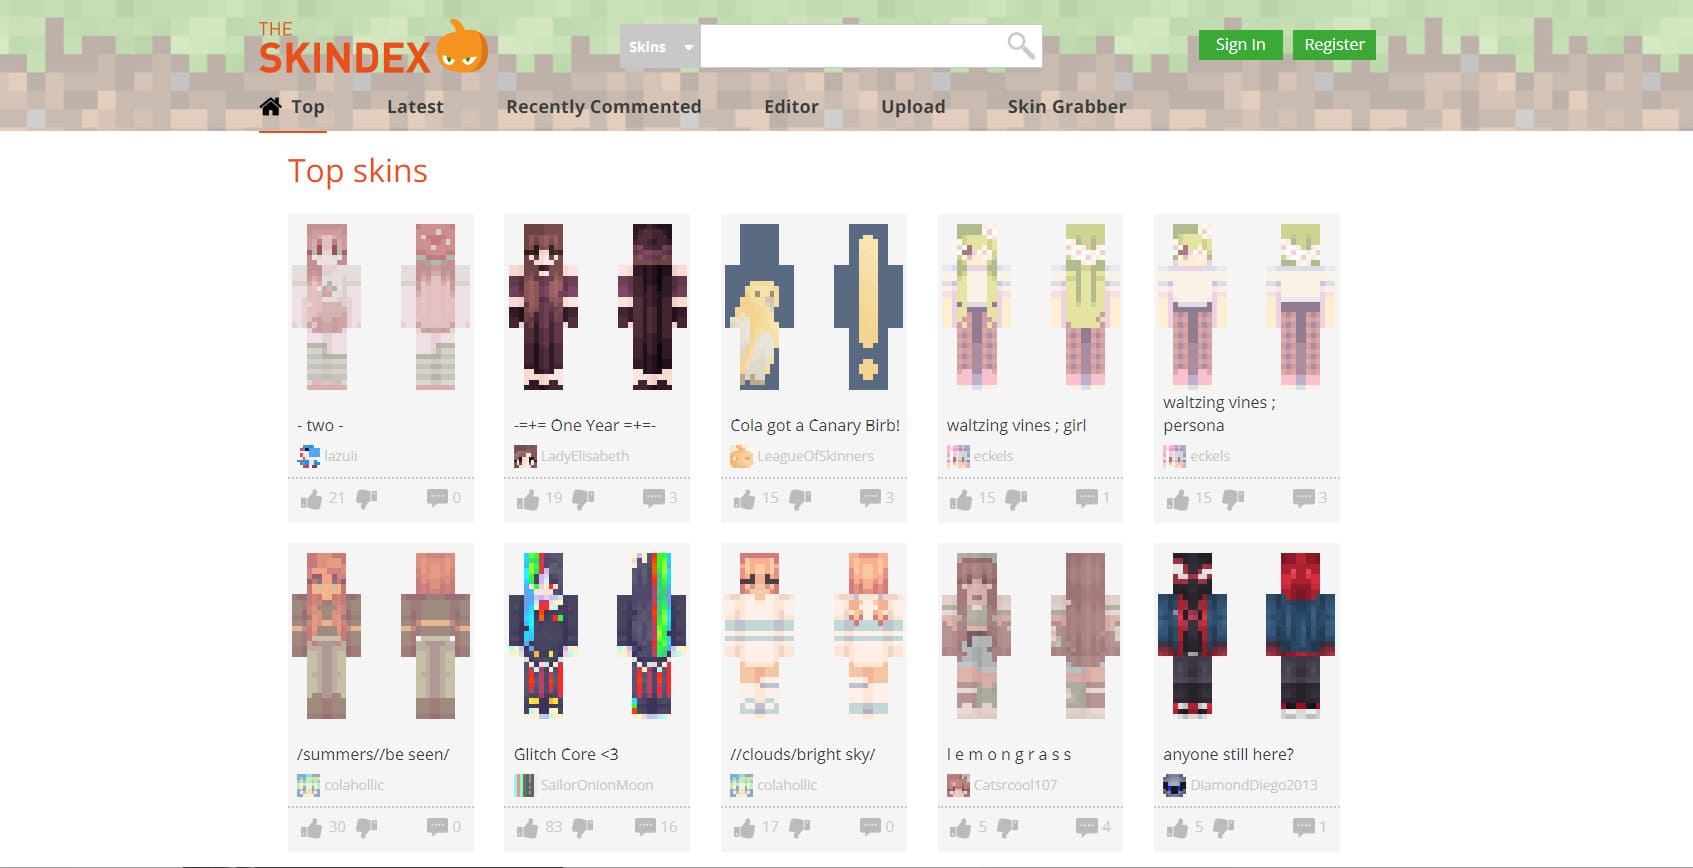 How to download and create skins in Minecraft: Step-by-step guide for PC